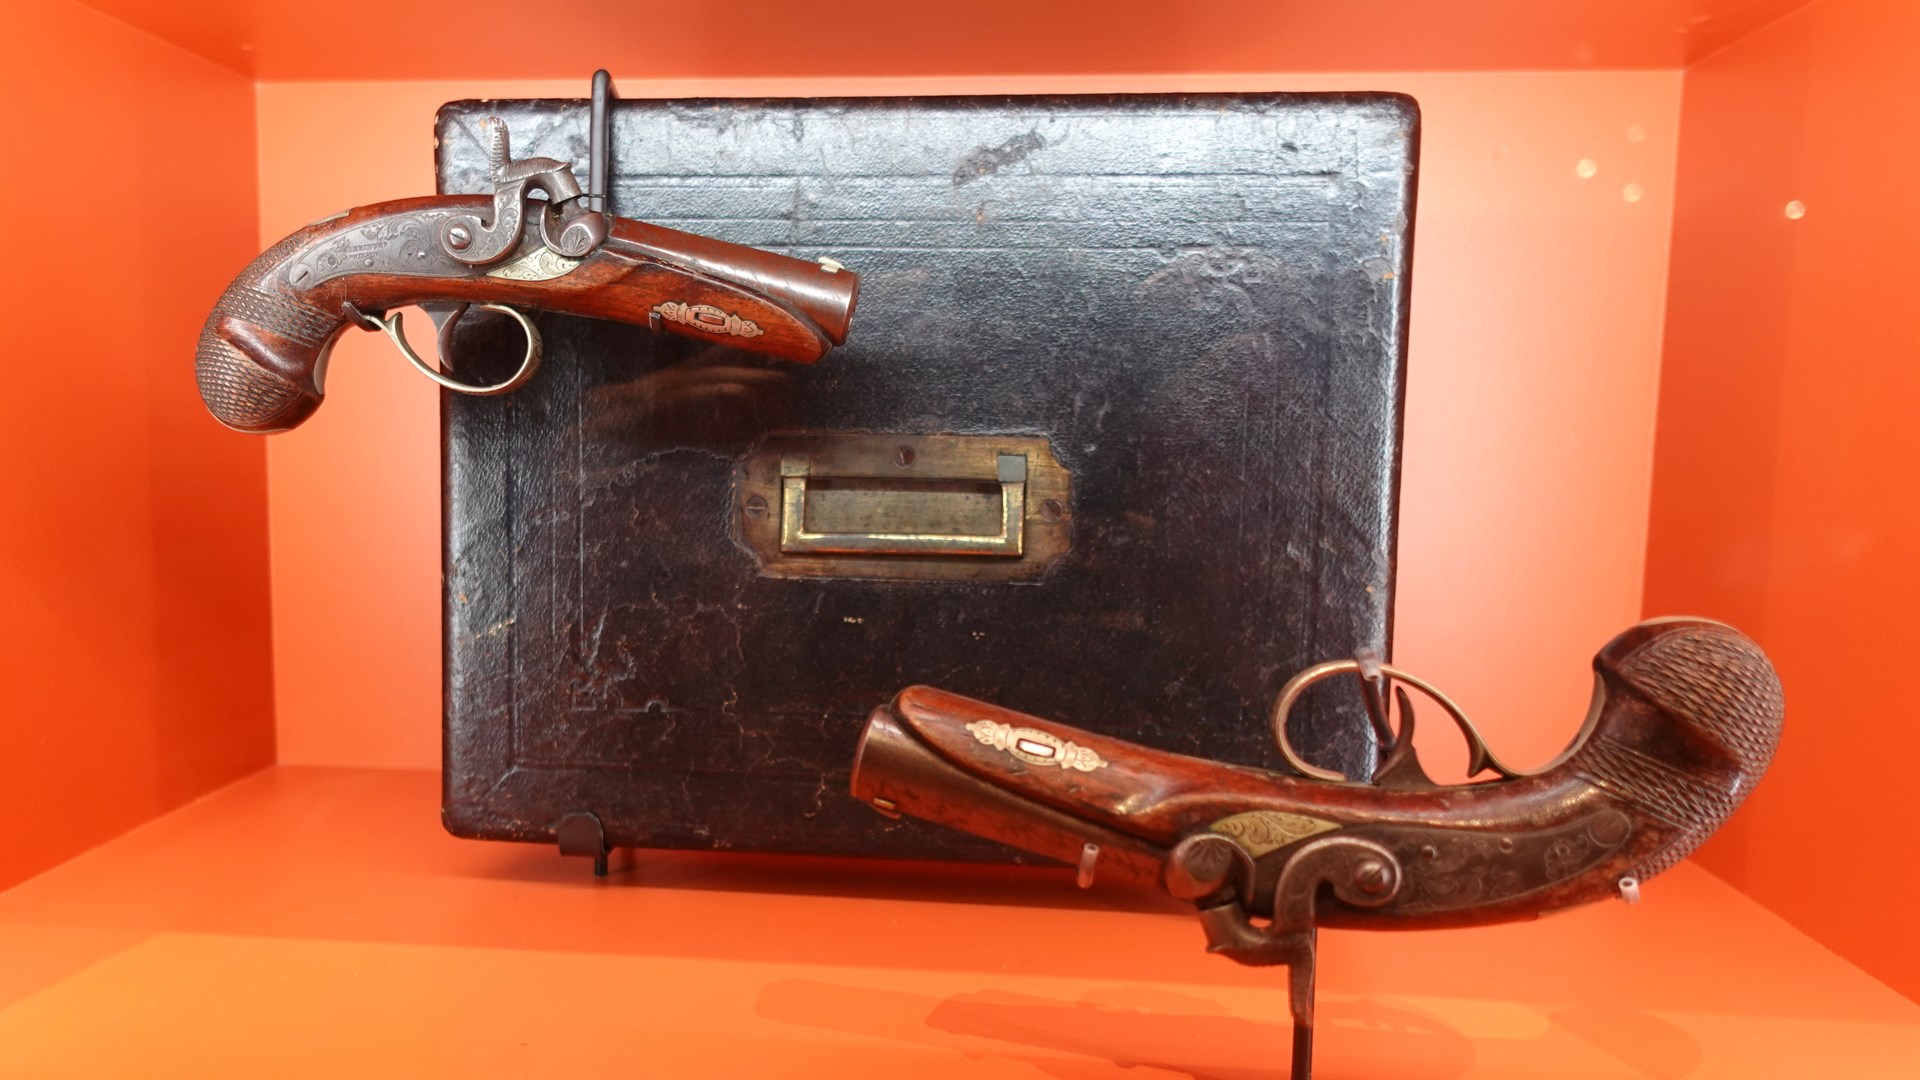 deringer pistols on display at cody firearms museum